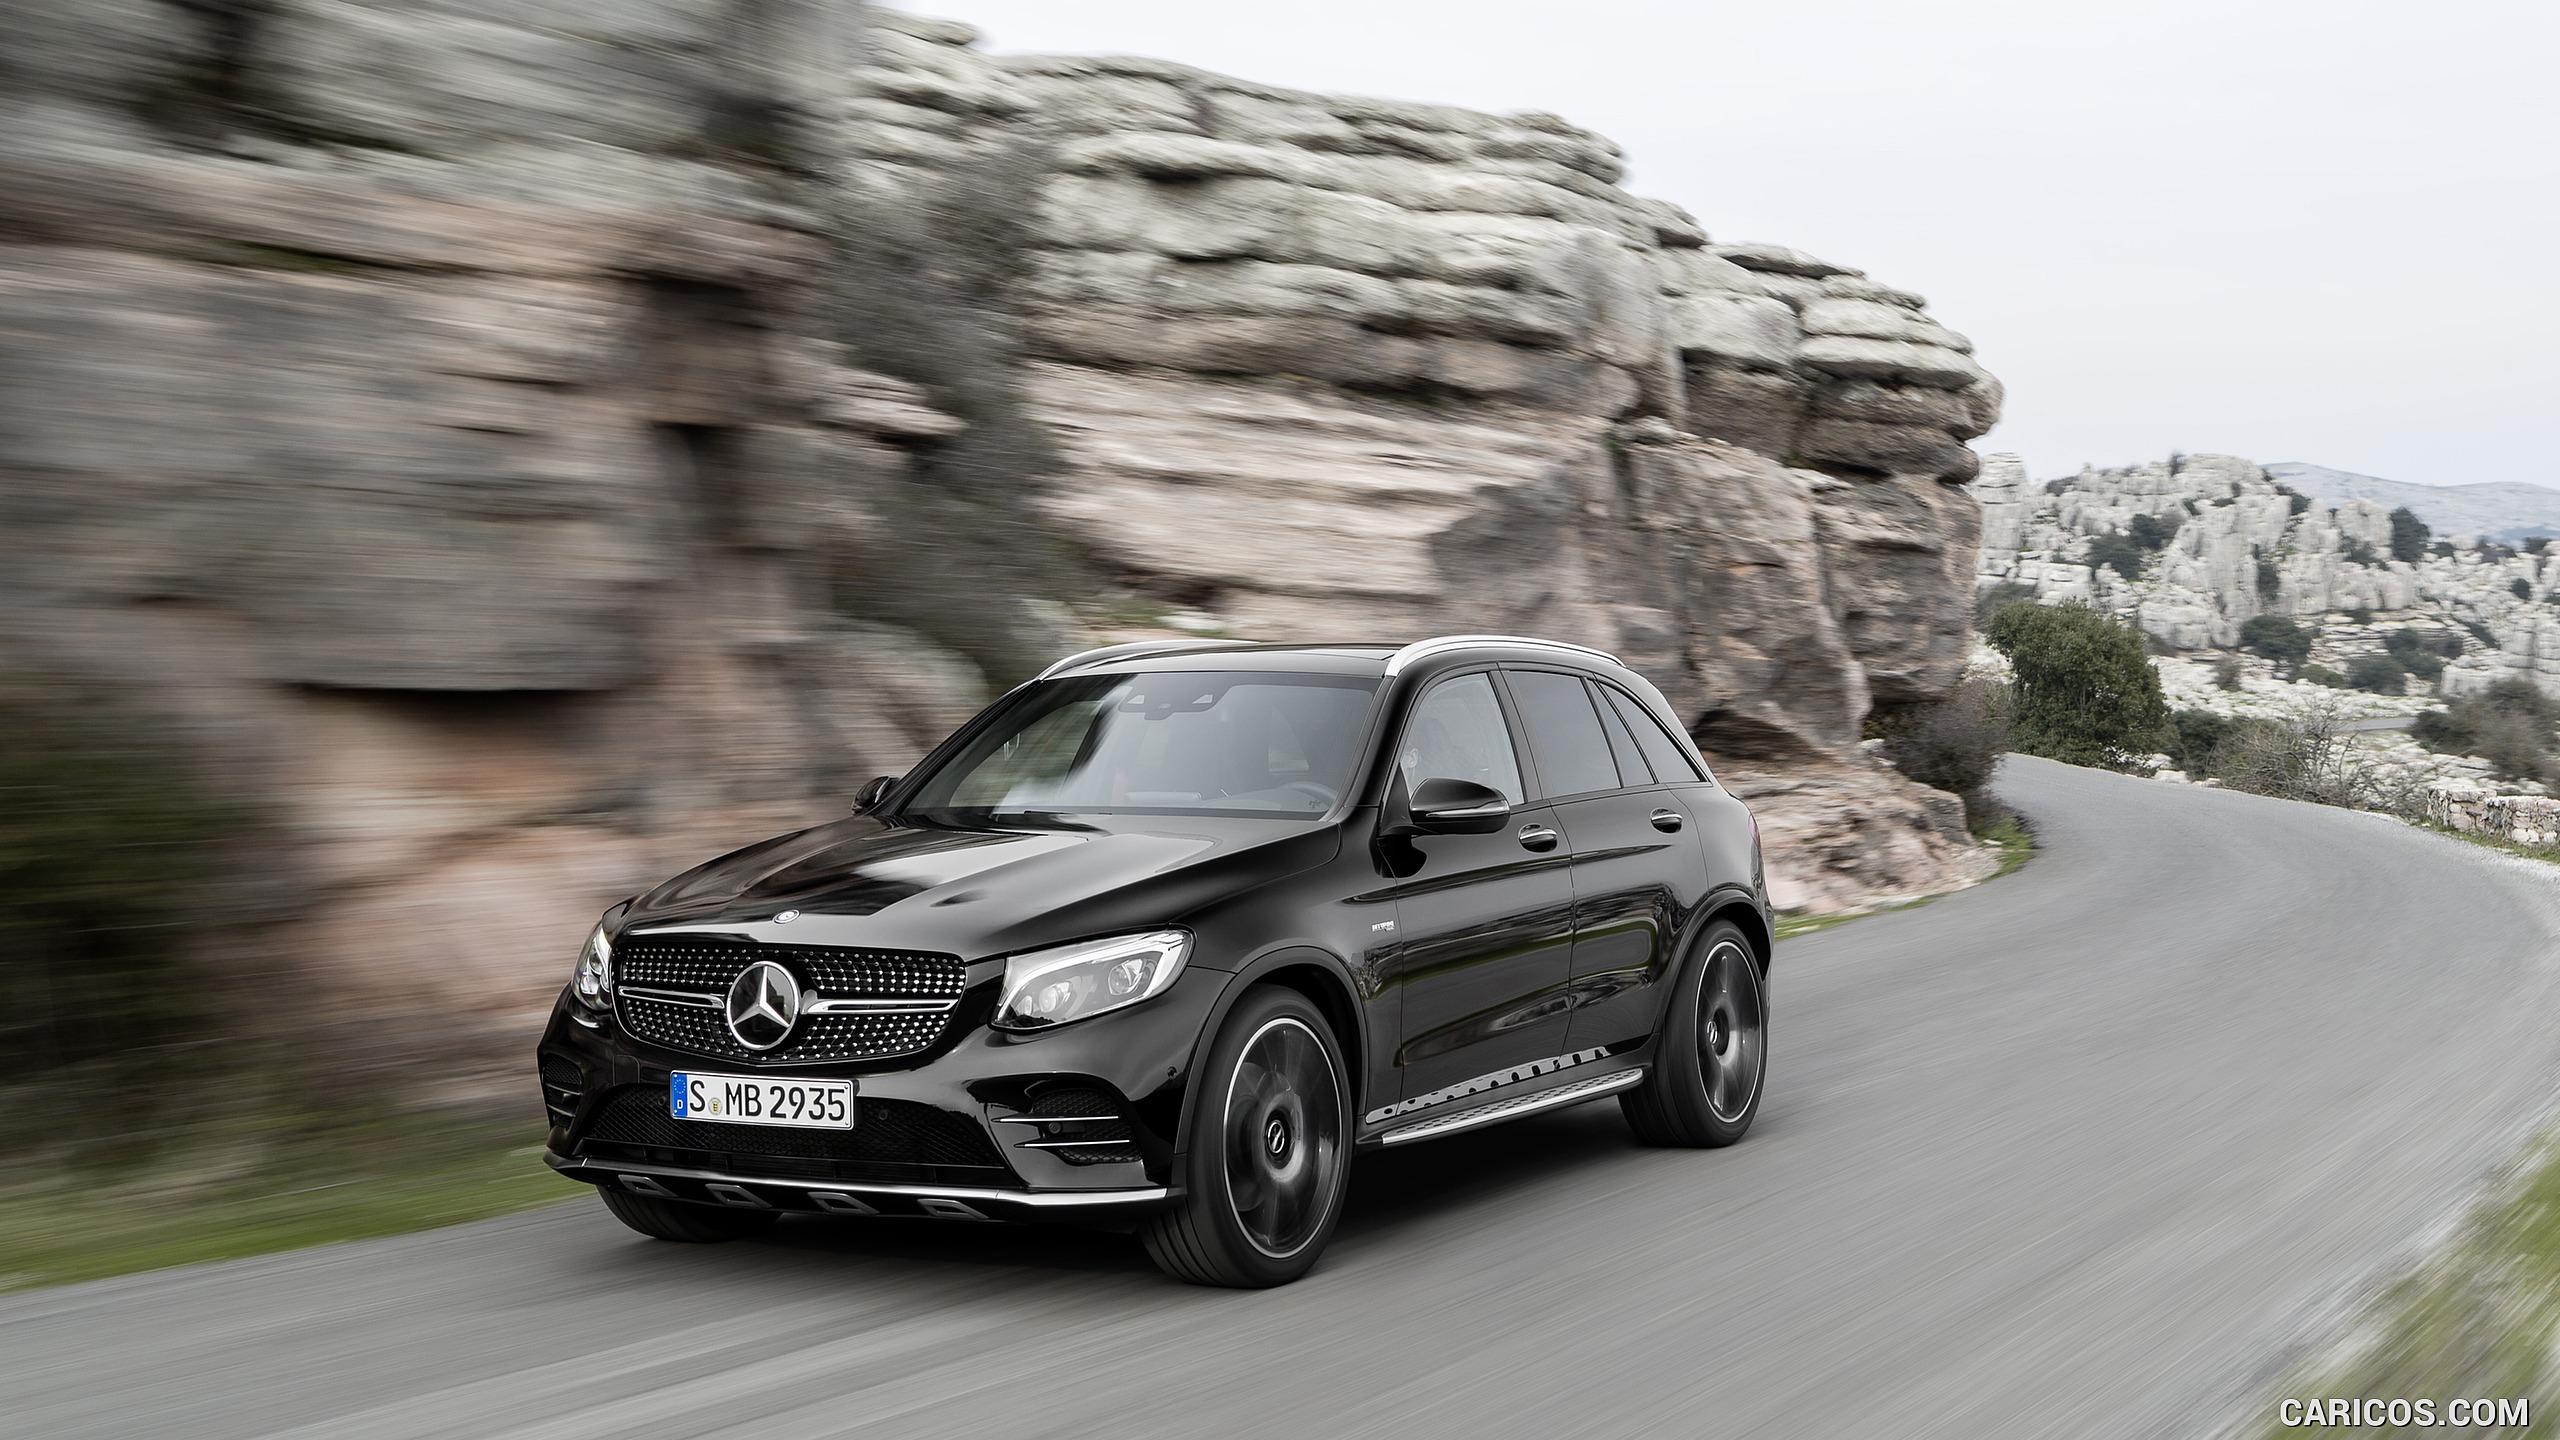 2017 Mercedes-AMG GLC 43 4MATIC (Chassis: X253, Color: Obsidian Black) - Front, #7 of 108